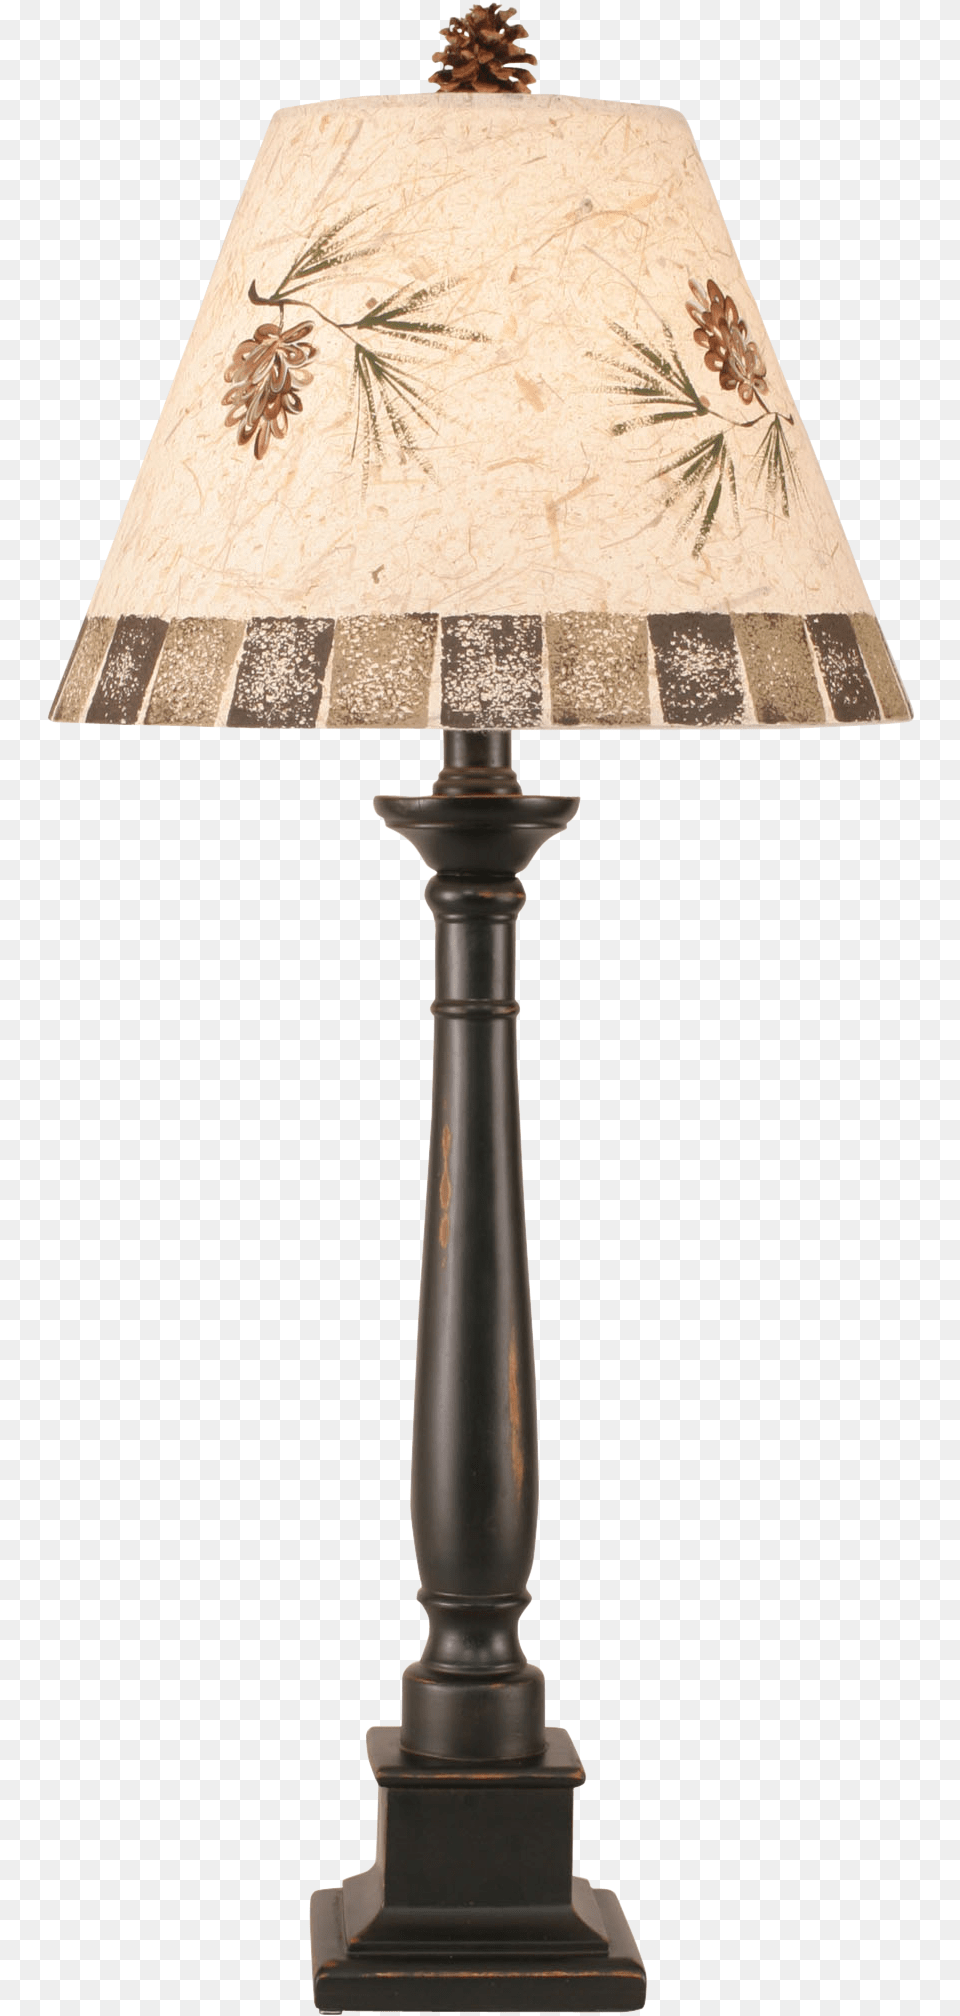 Pine Branch Square Candlestick Lampshade, Lamp, Table Lamp Free Png Download